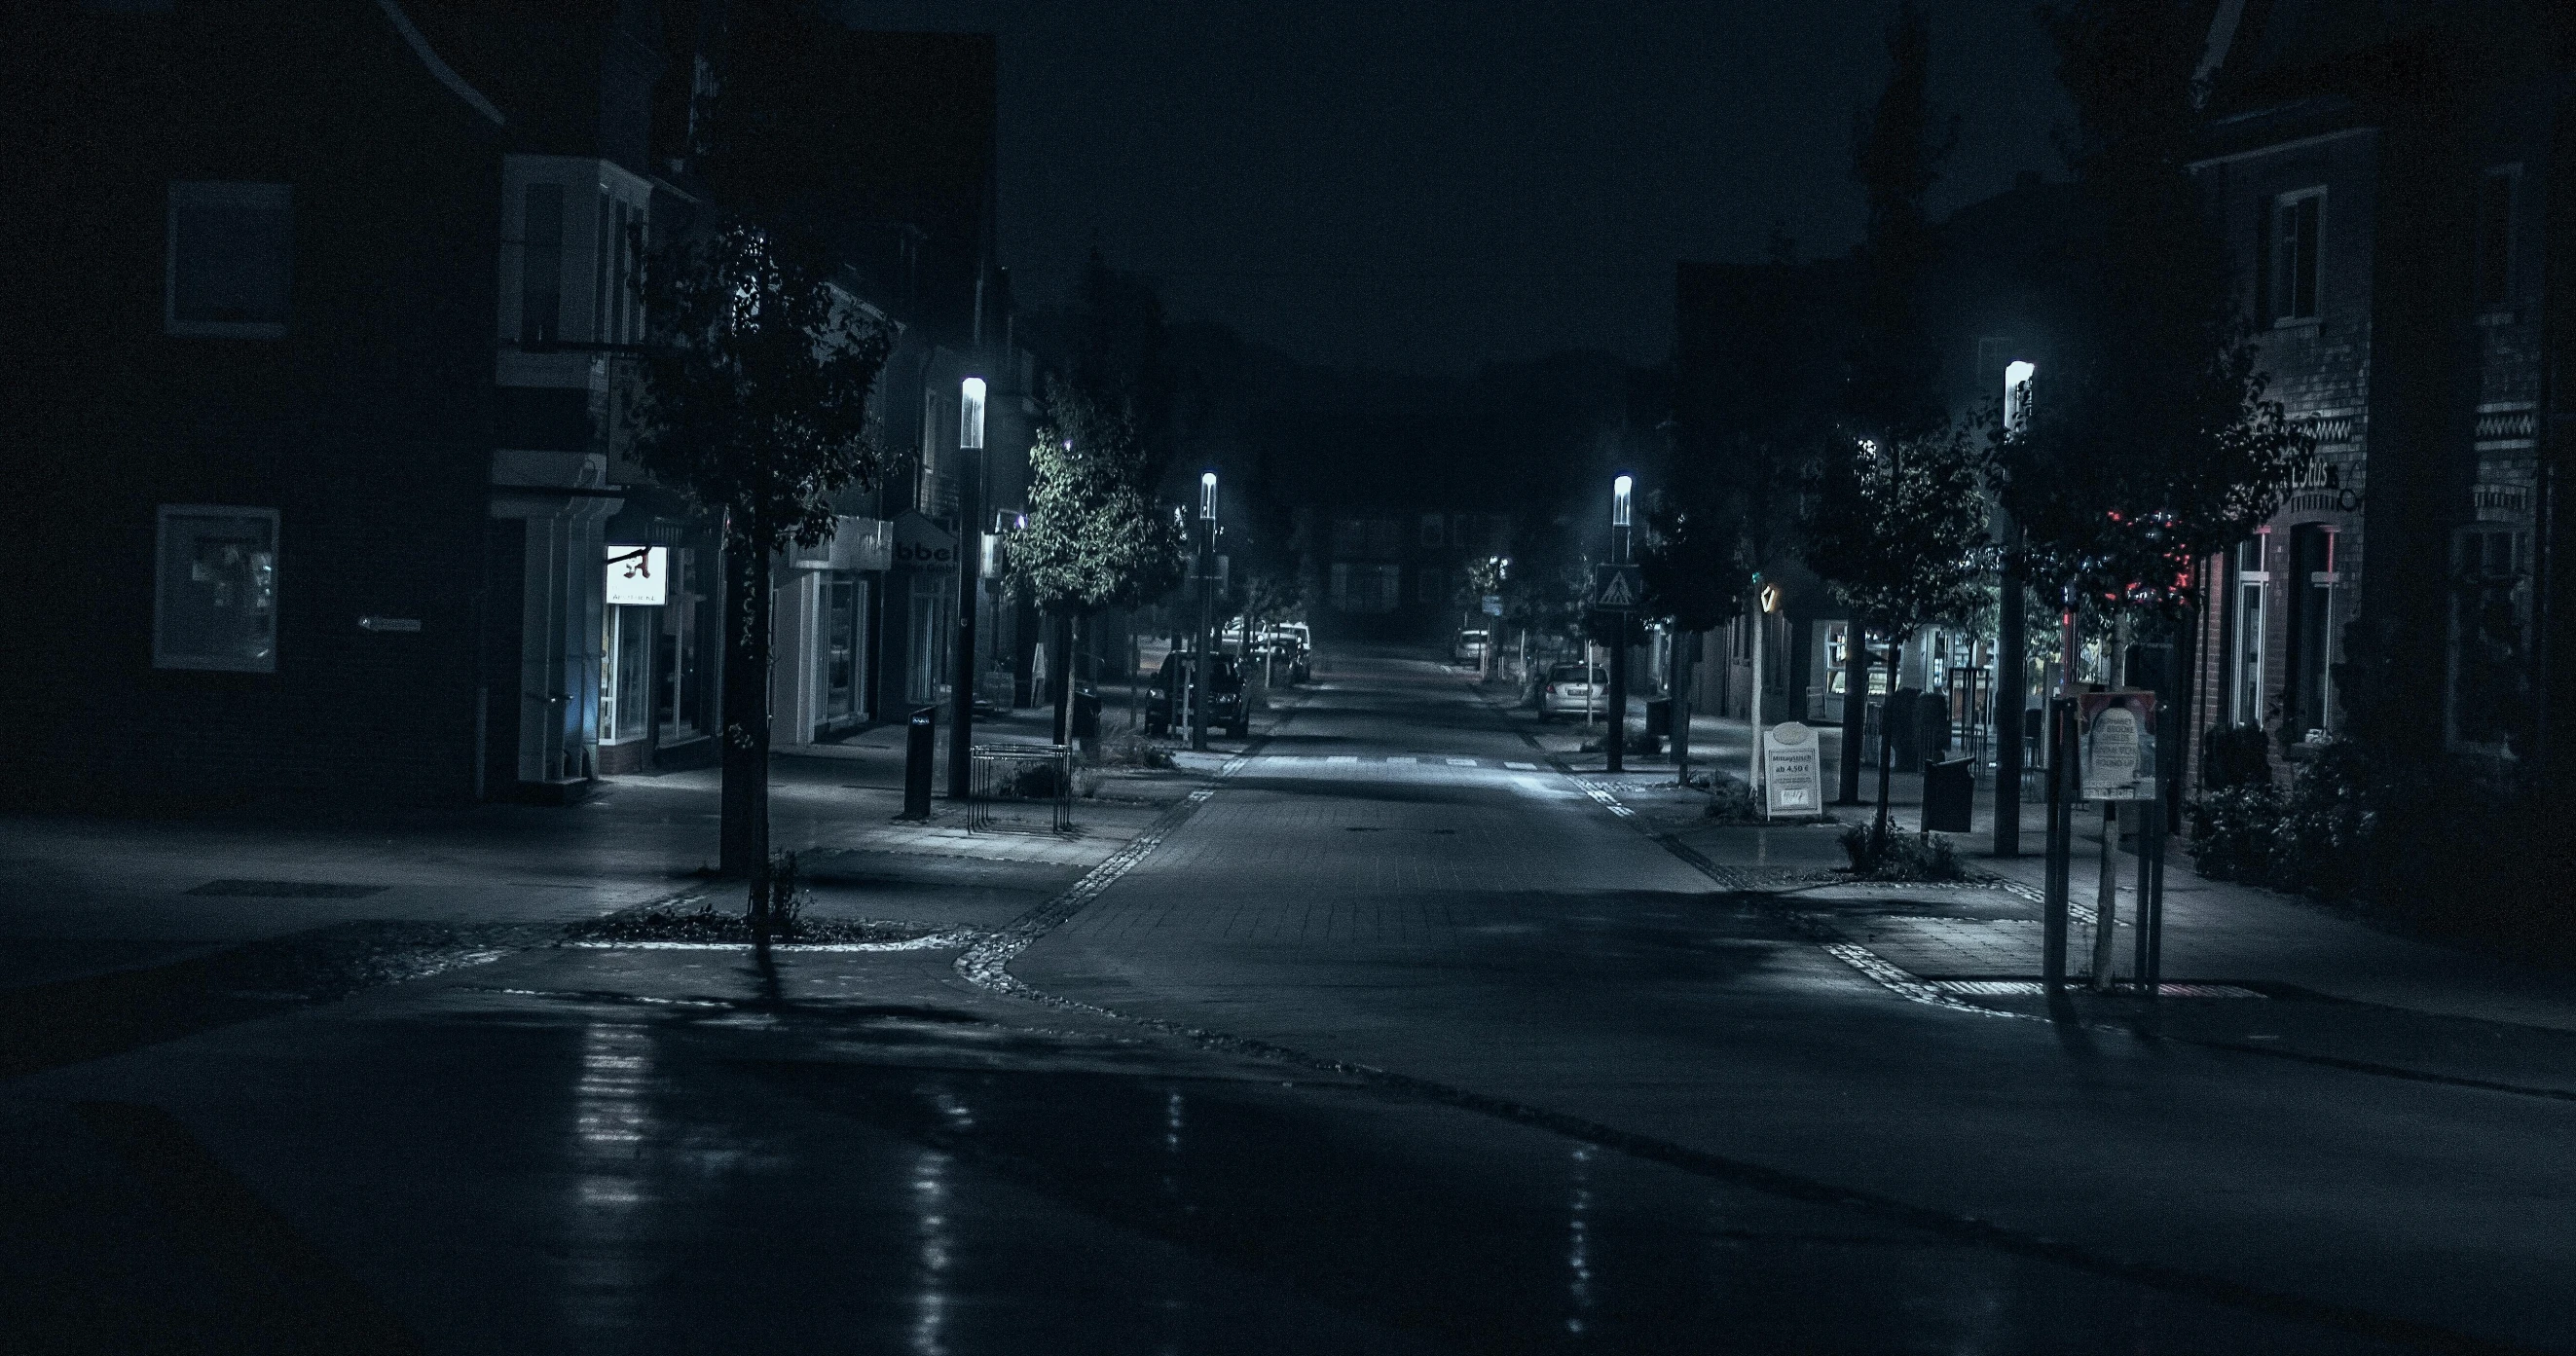 a black and white photo of a street at night, inspired by Gregory Crewdson, pexels contest winner, hyperrealism, midwest town, horror setting, street of teal stone, videogame still